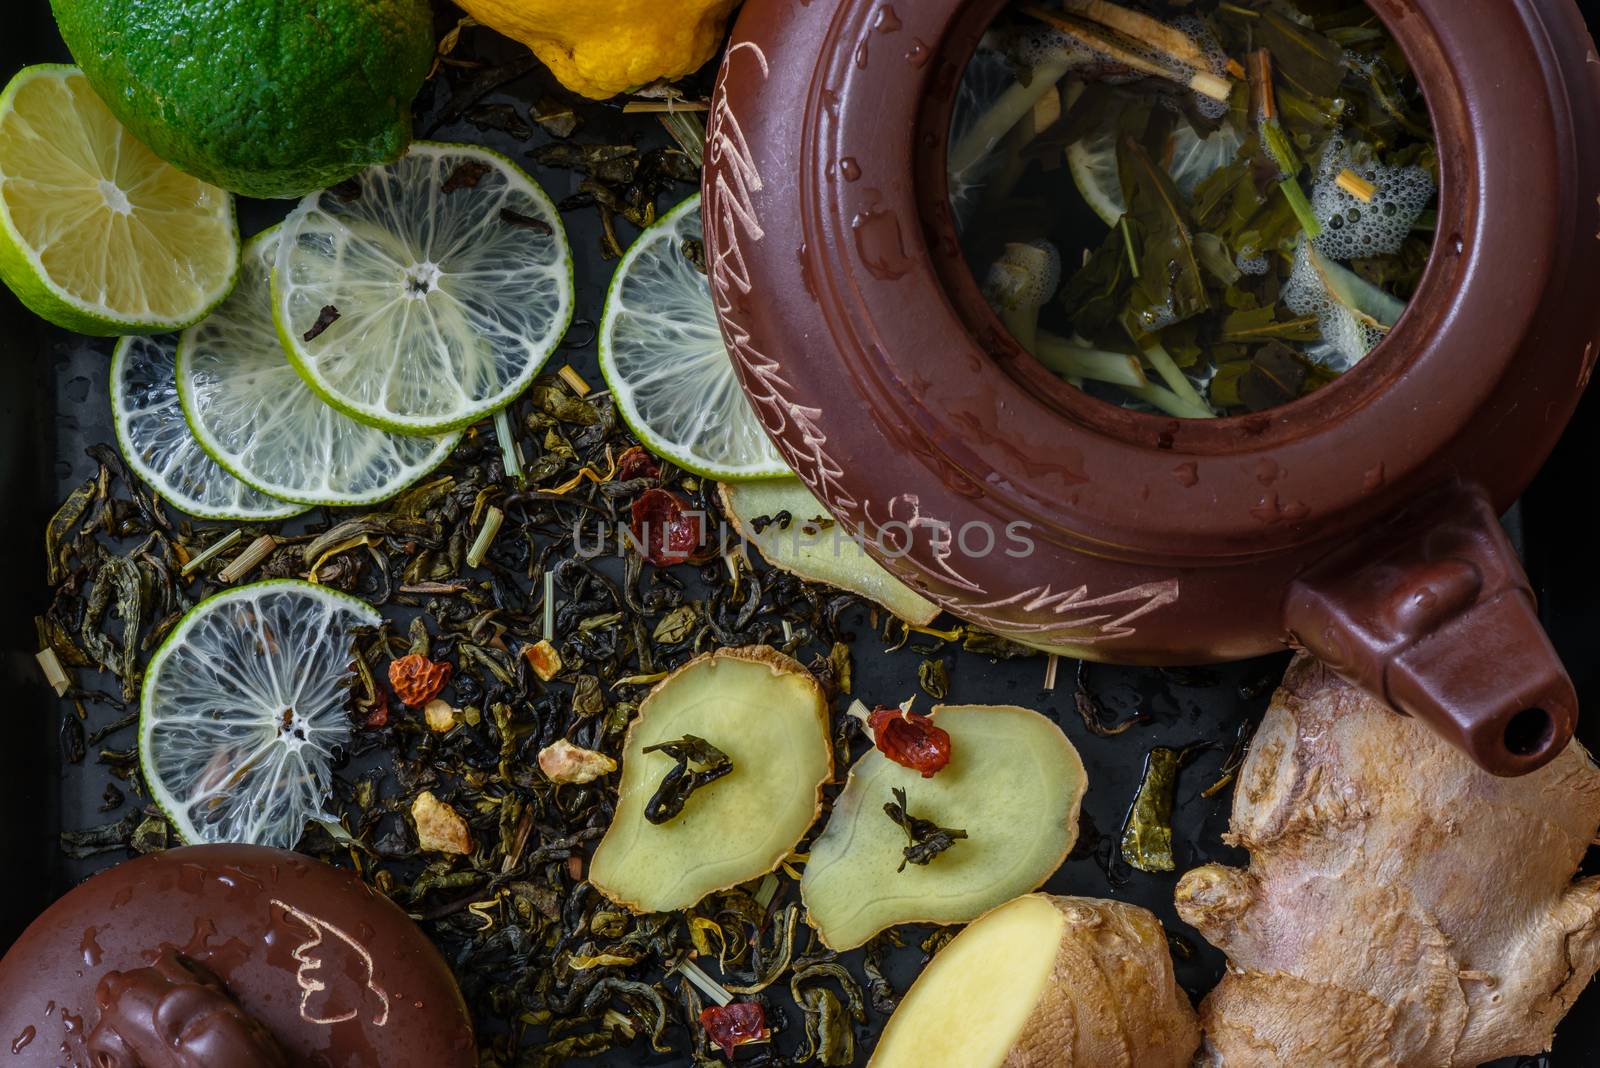 Ingredients fortea recipe with lime and ginger by Seva_blsv